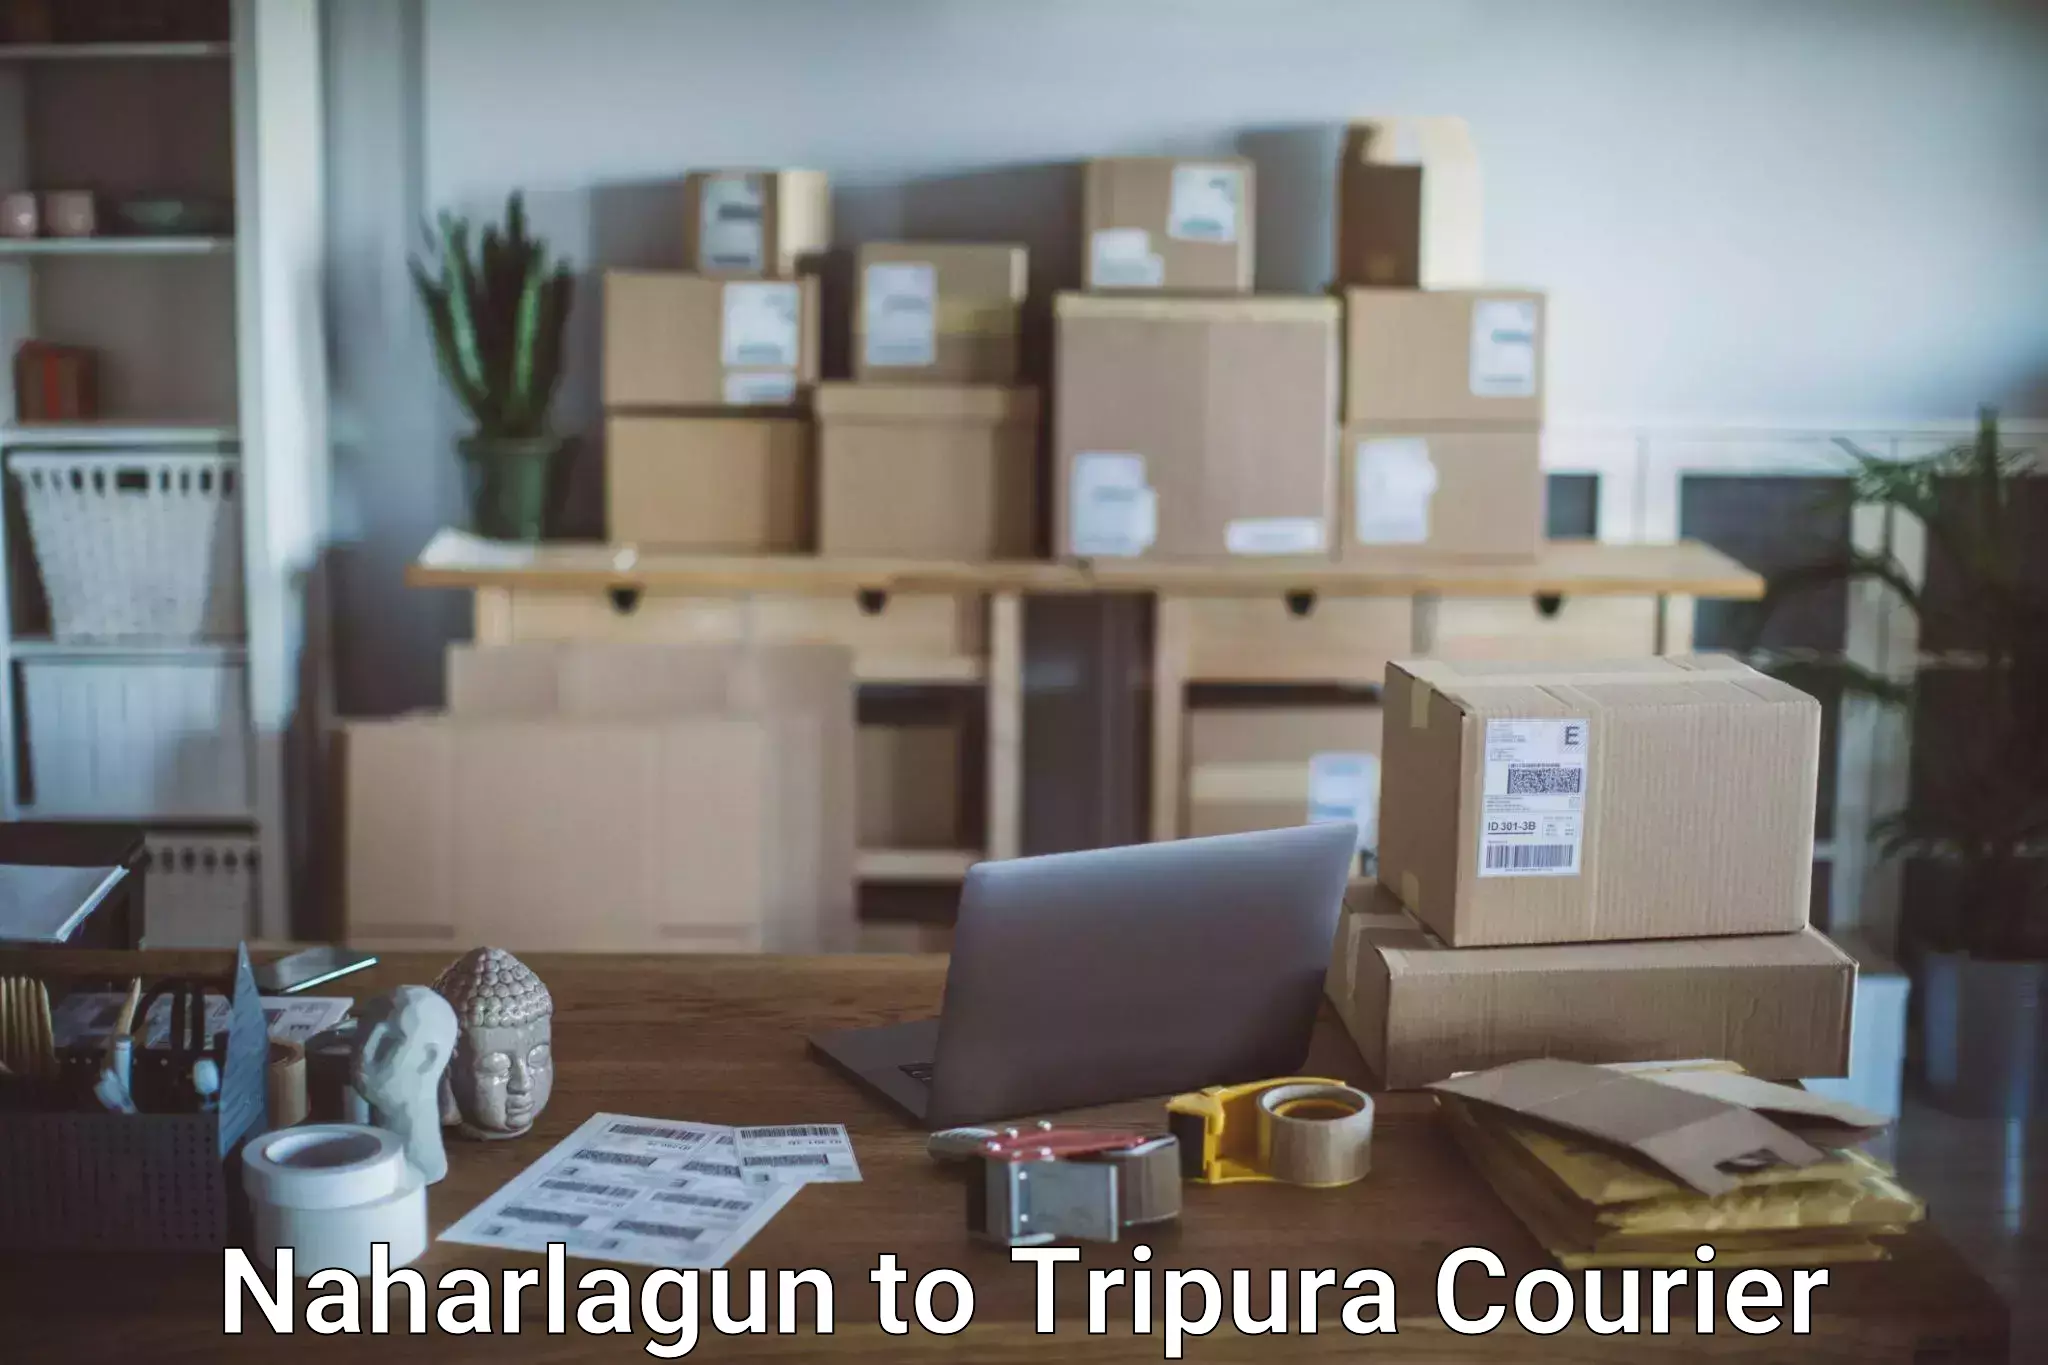 Airport luggage delivery Naharlagun to Udaipur Tripura